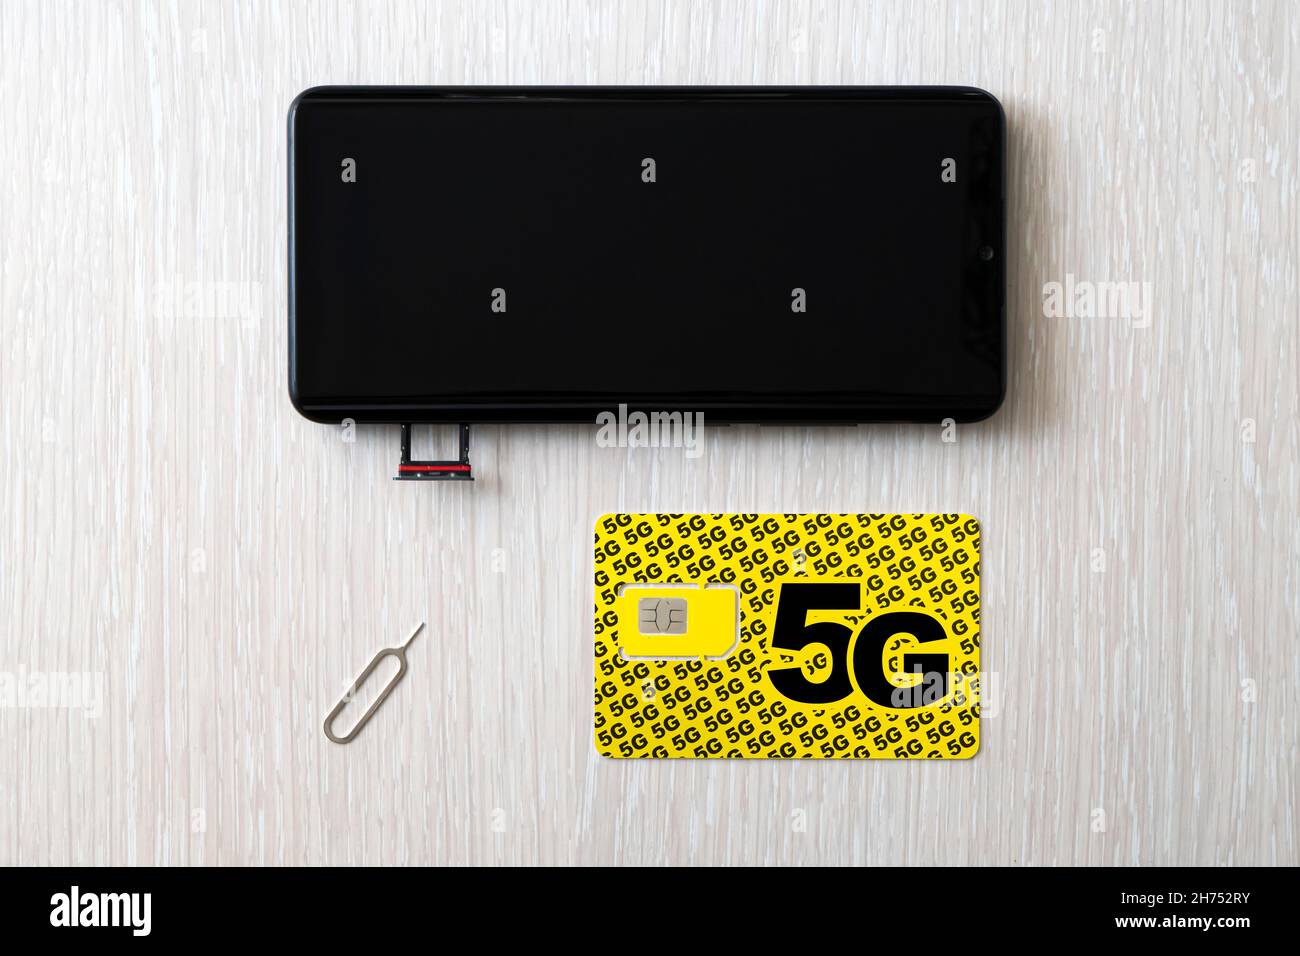 Replacing a 4G SIM card with a high speed 5g SIM card close up on the store's wooden table Stock Photo